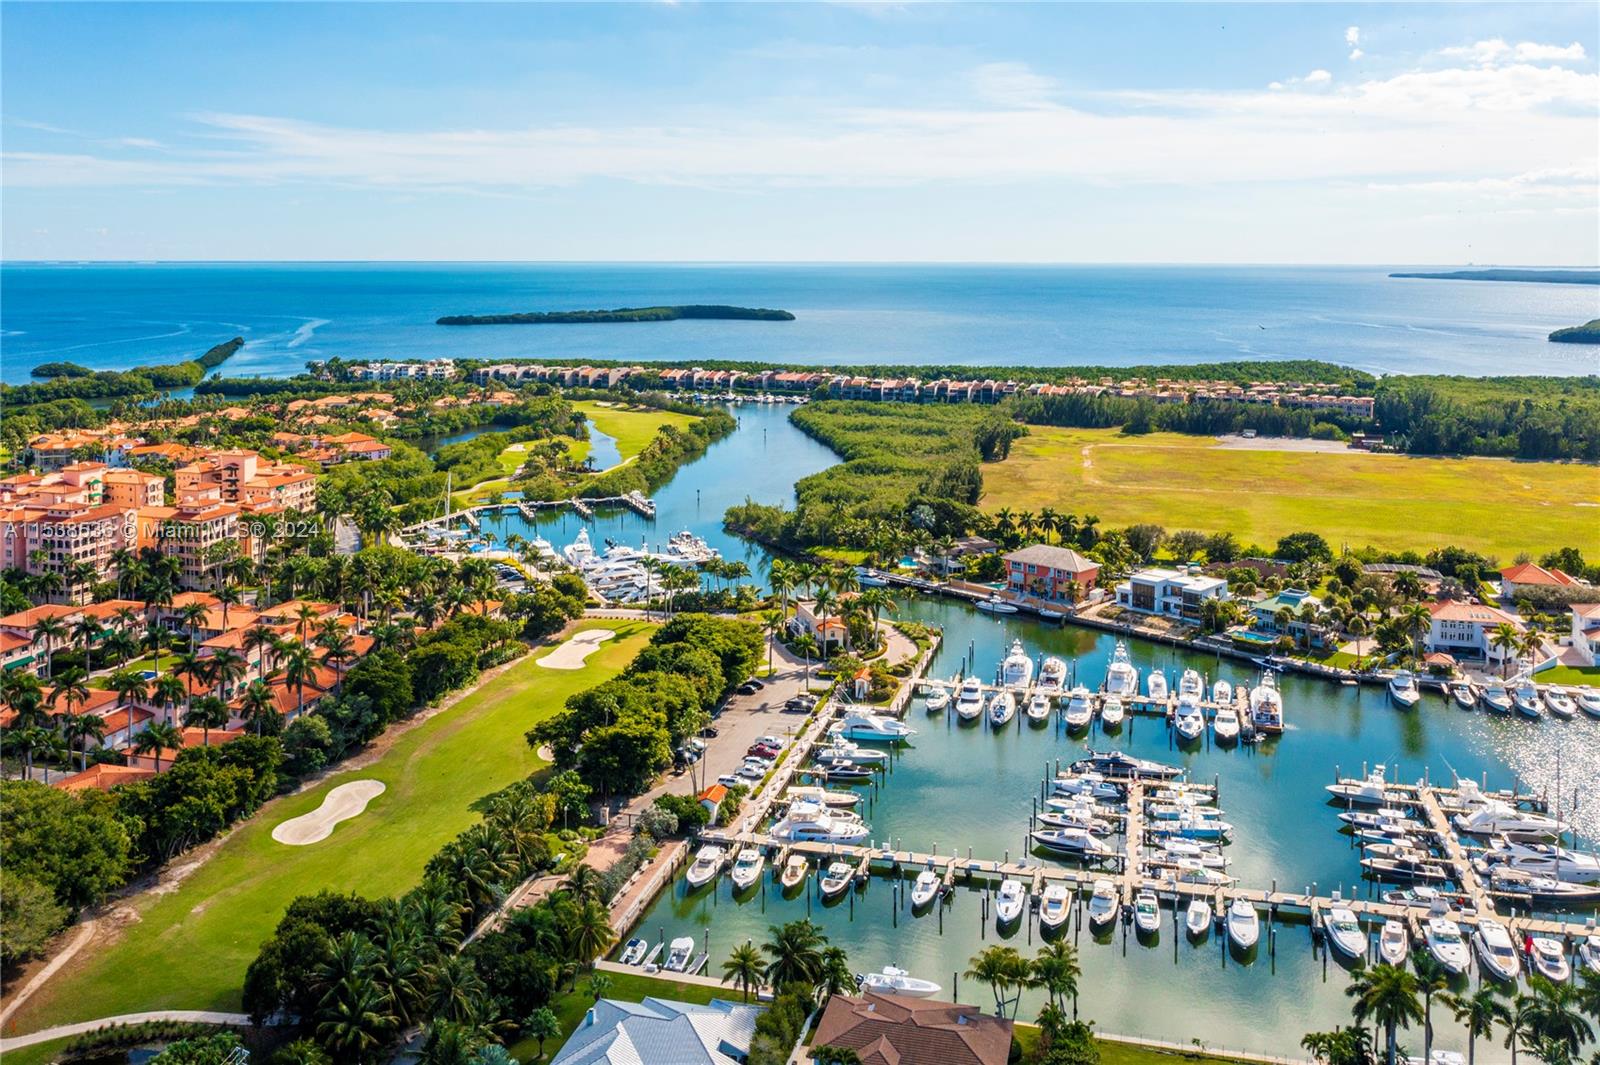 Discover paradise amidst palm trees, the serene marinas, and the lush greenery of the Arnold Palmer Golf Course at Deering Bay Yacht & Country Club. This prestigious gated community unveils the exquisite Padua corner residence, spanning 4,220 SF with 4 beds and 4.5 baths plus den. Delight in the 180-degree wraparound balcony, offering panoramic views of the lagoon, marina, tropical landscapes, and Biscayne Bay. Deering Bay's magnificent 30,000 square-foot Clubhouse presents a superlative dining and service experience, featuring exquisitely crafted cuisine savored within a serene setting. At a private tennis club, members are able to enjoy 7 Har-Tru tennis courts. Embrace the gorgeous sunrise every day, surrounded by unparalleled beauty and nature! Your amazing new lifestyle awaits!